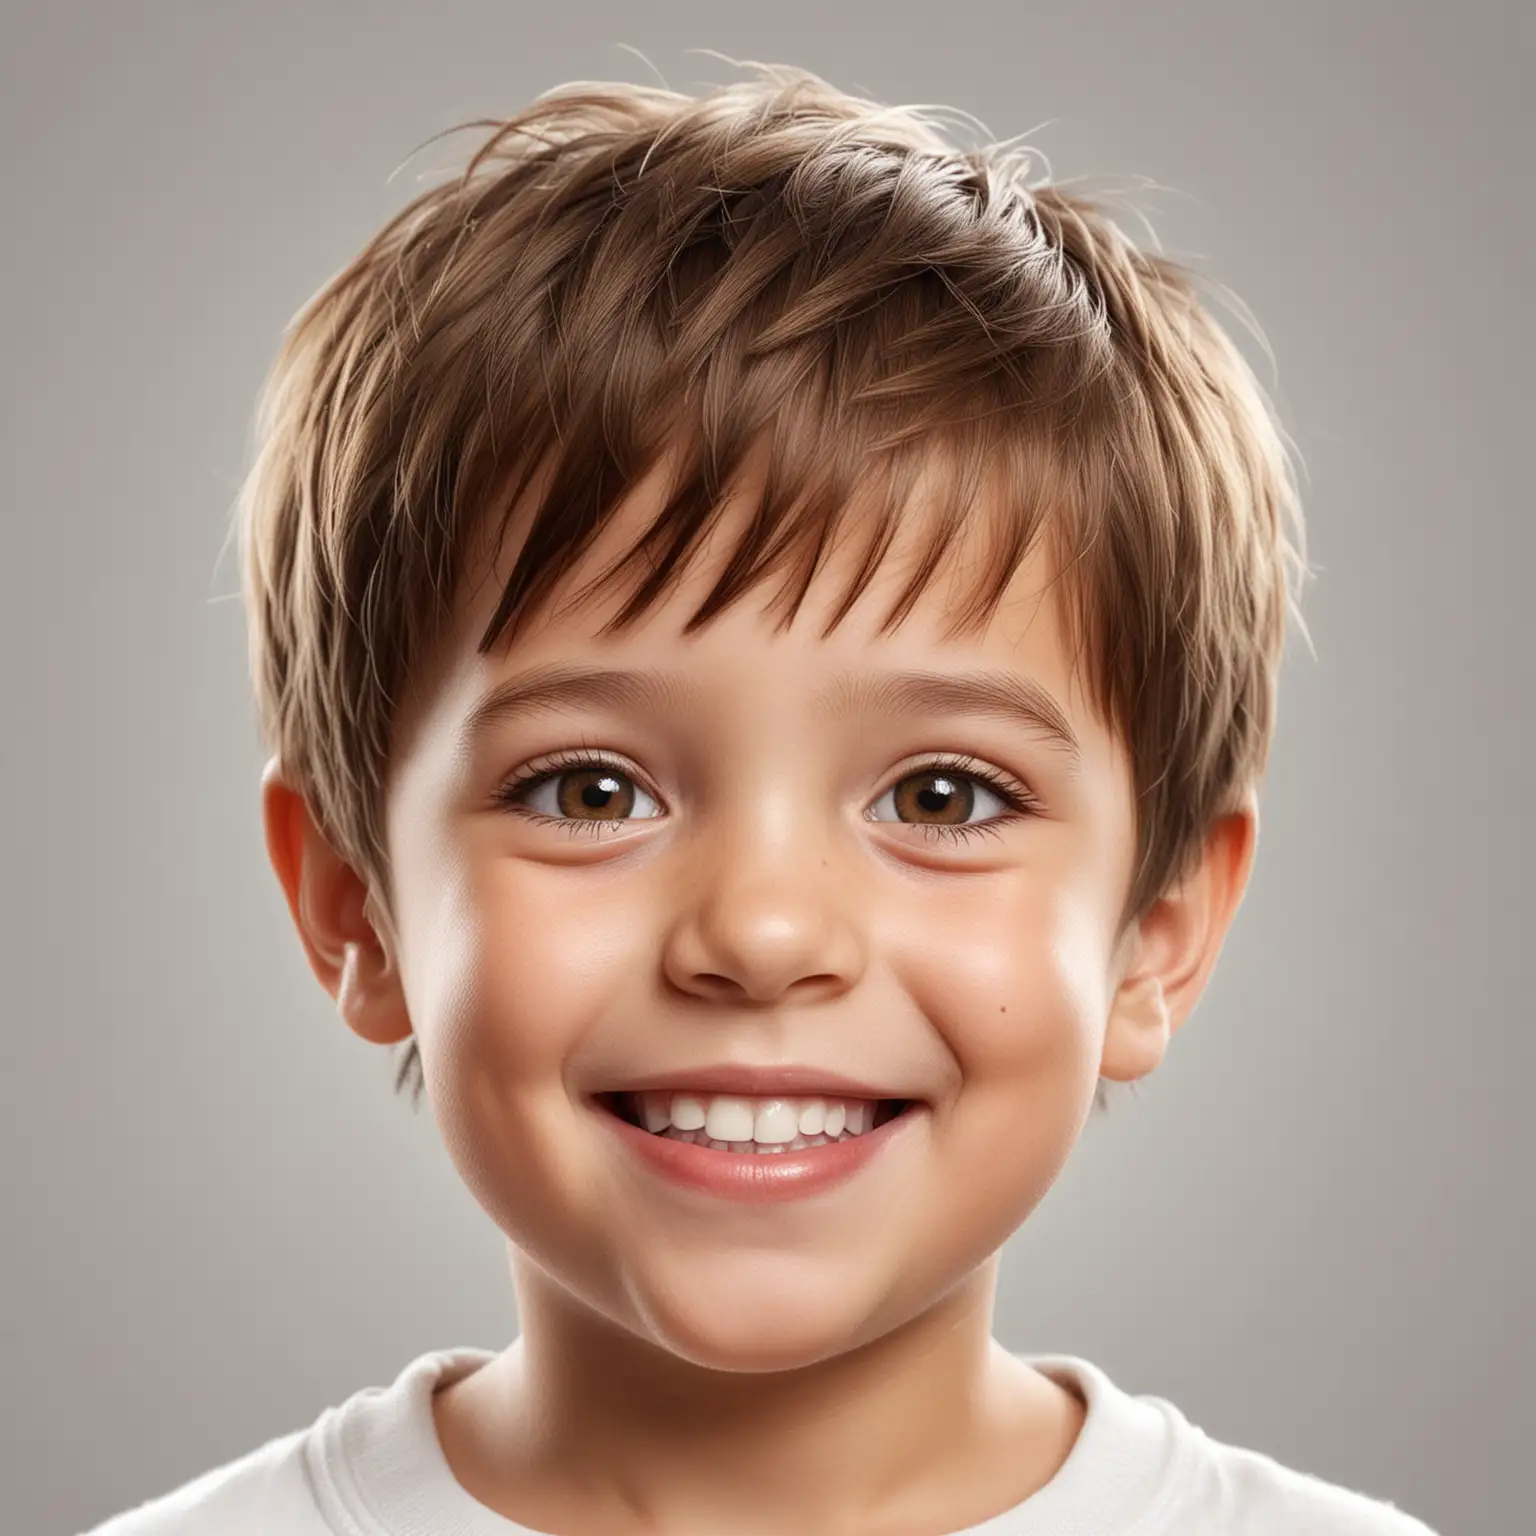 Happy 5YearOld Boy with Brown Hair Smiling Realistic Illustration